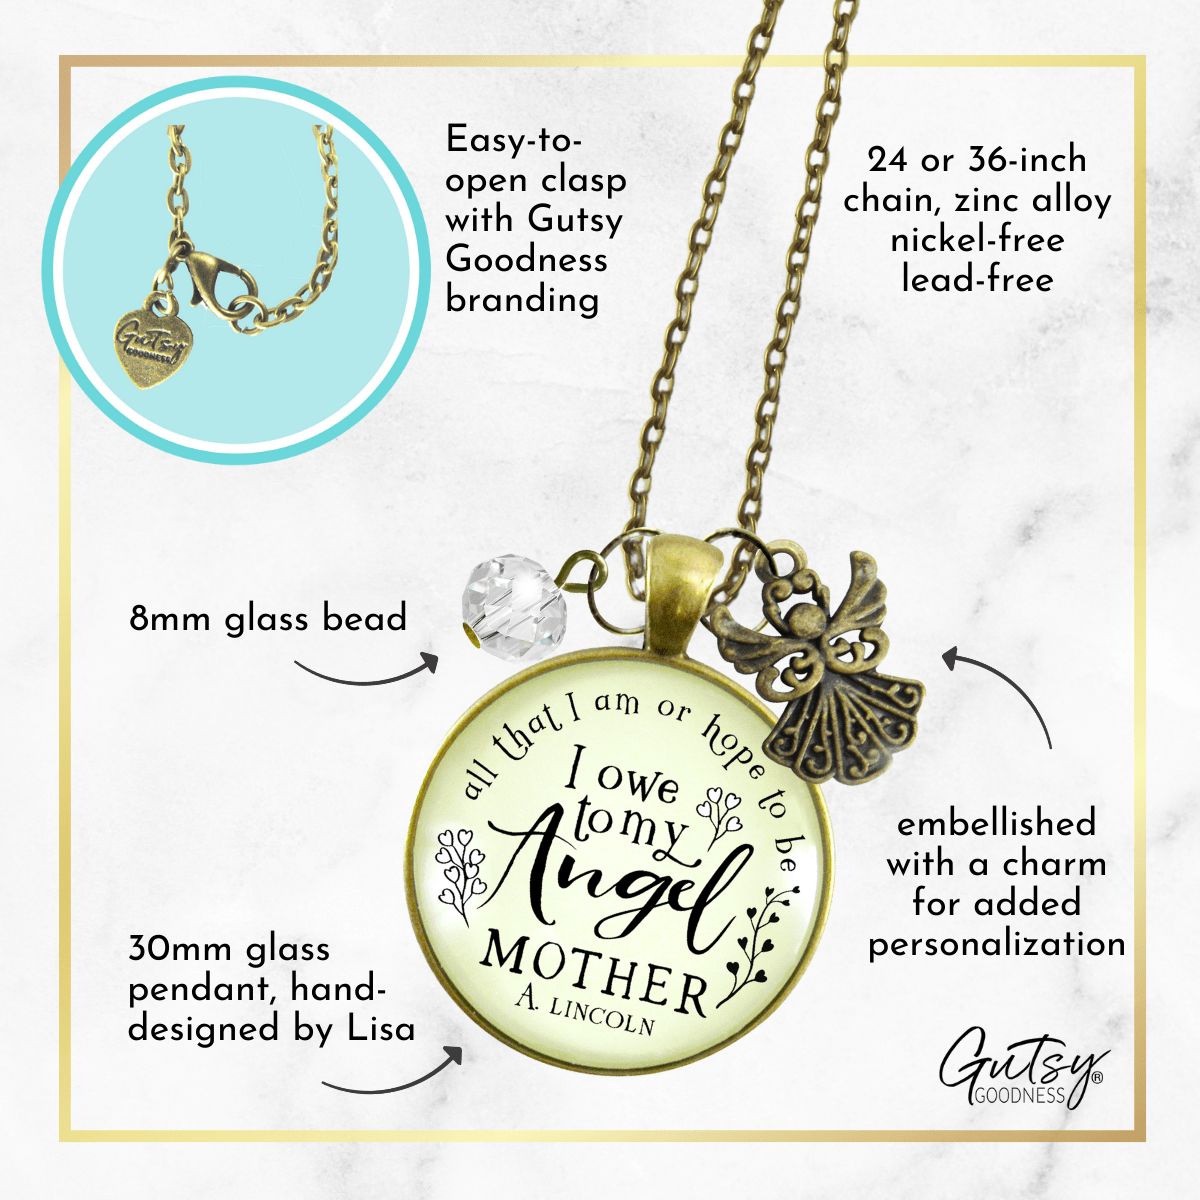 Gutsy Goodness Mom Remembrance Angel Necklace All I am Quote Memorial Jewelry Gift - Gutsy Goodness;Mom Remembrance Angel Necklace All I Am Quote Memorial Jewelry Gift - Gutsy Goodness Handmade Jewelry Gifts